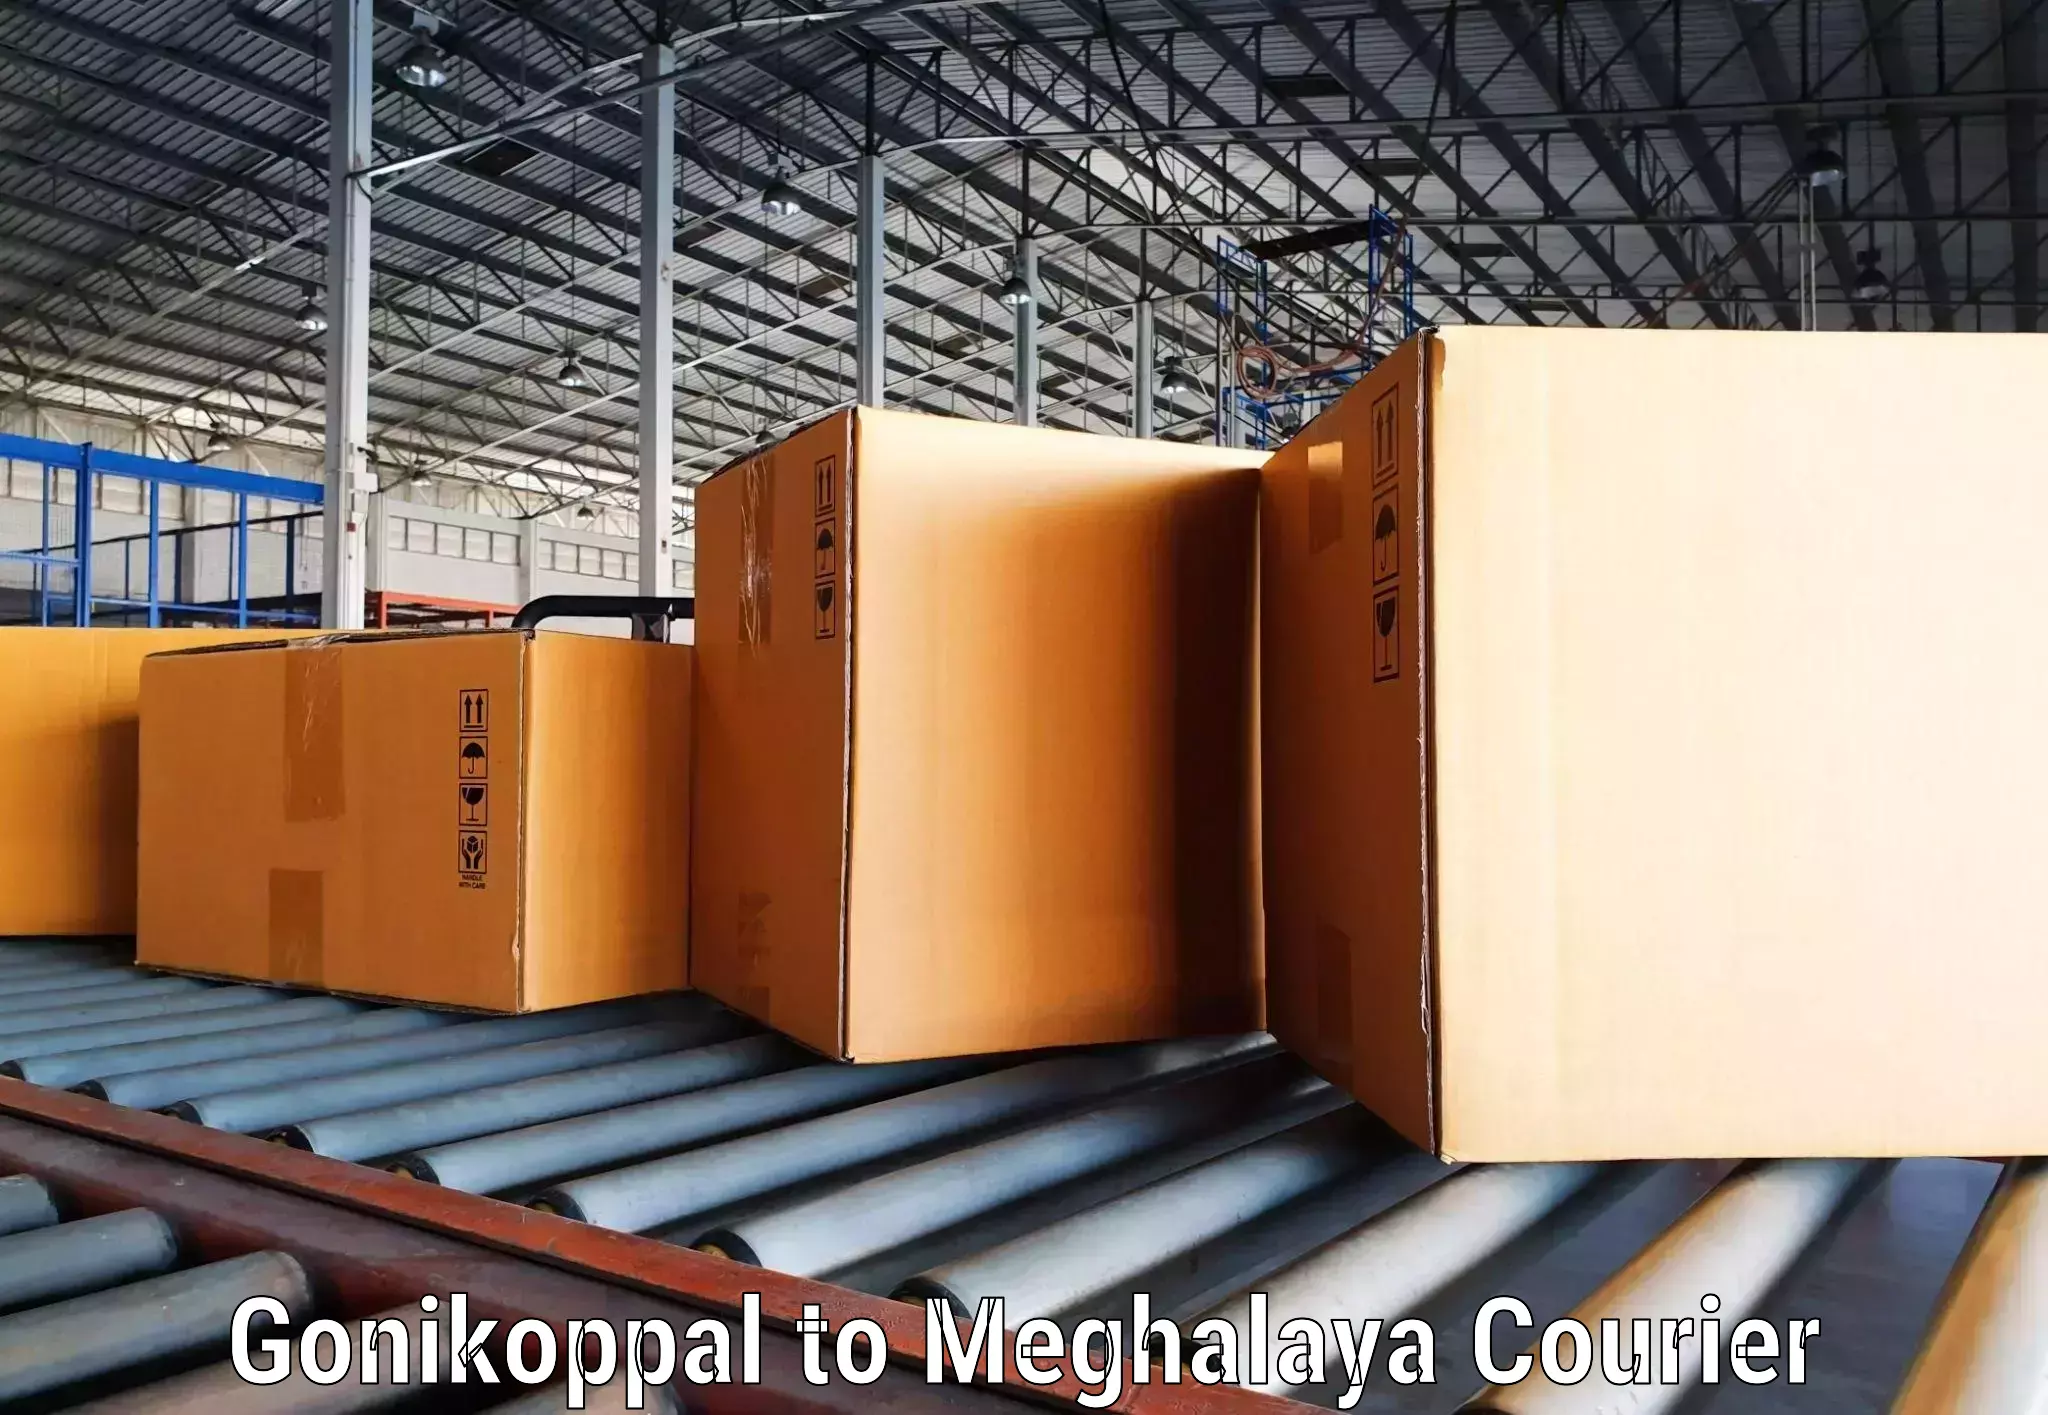 State-of-the-art courier technology Gonikoppal to Nongstoin